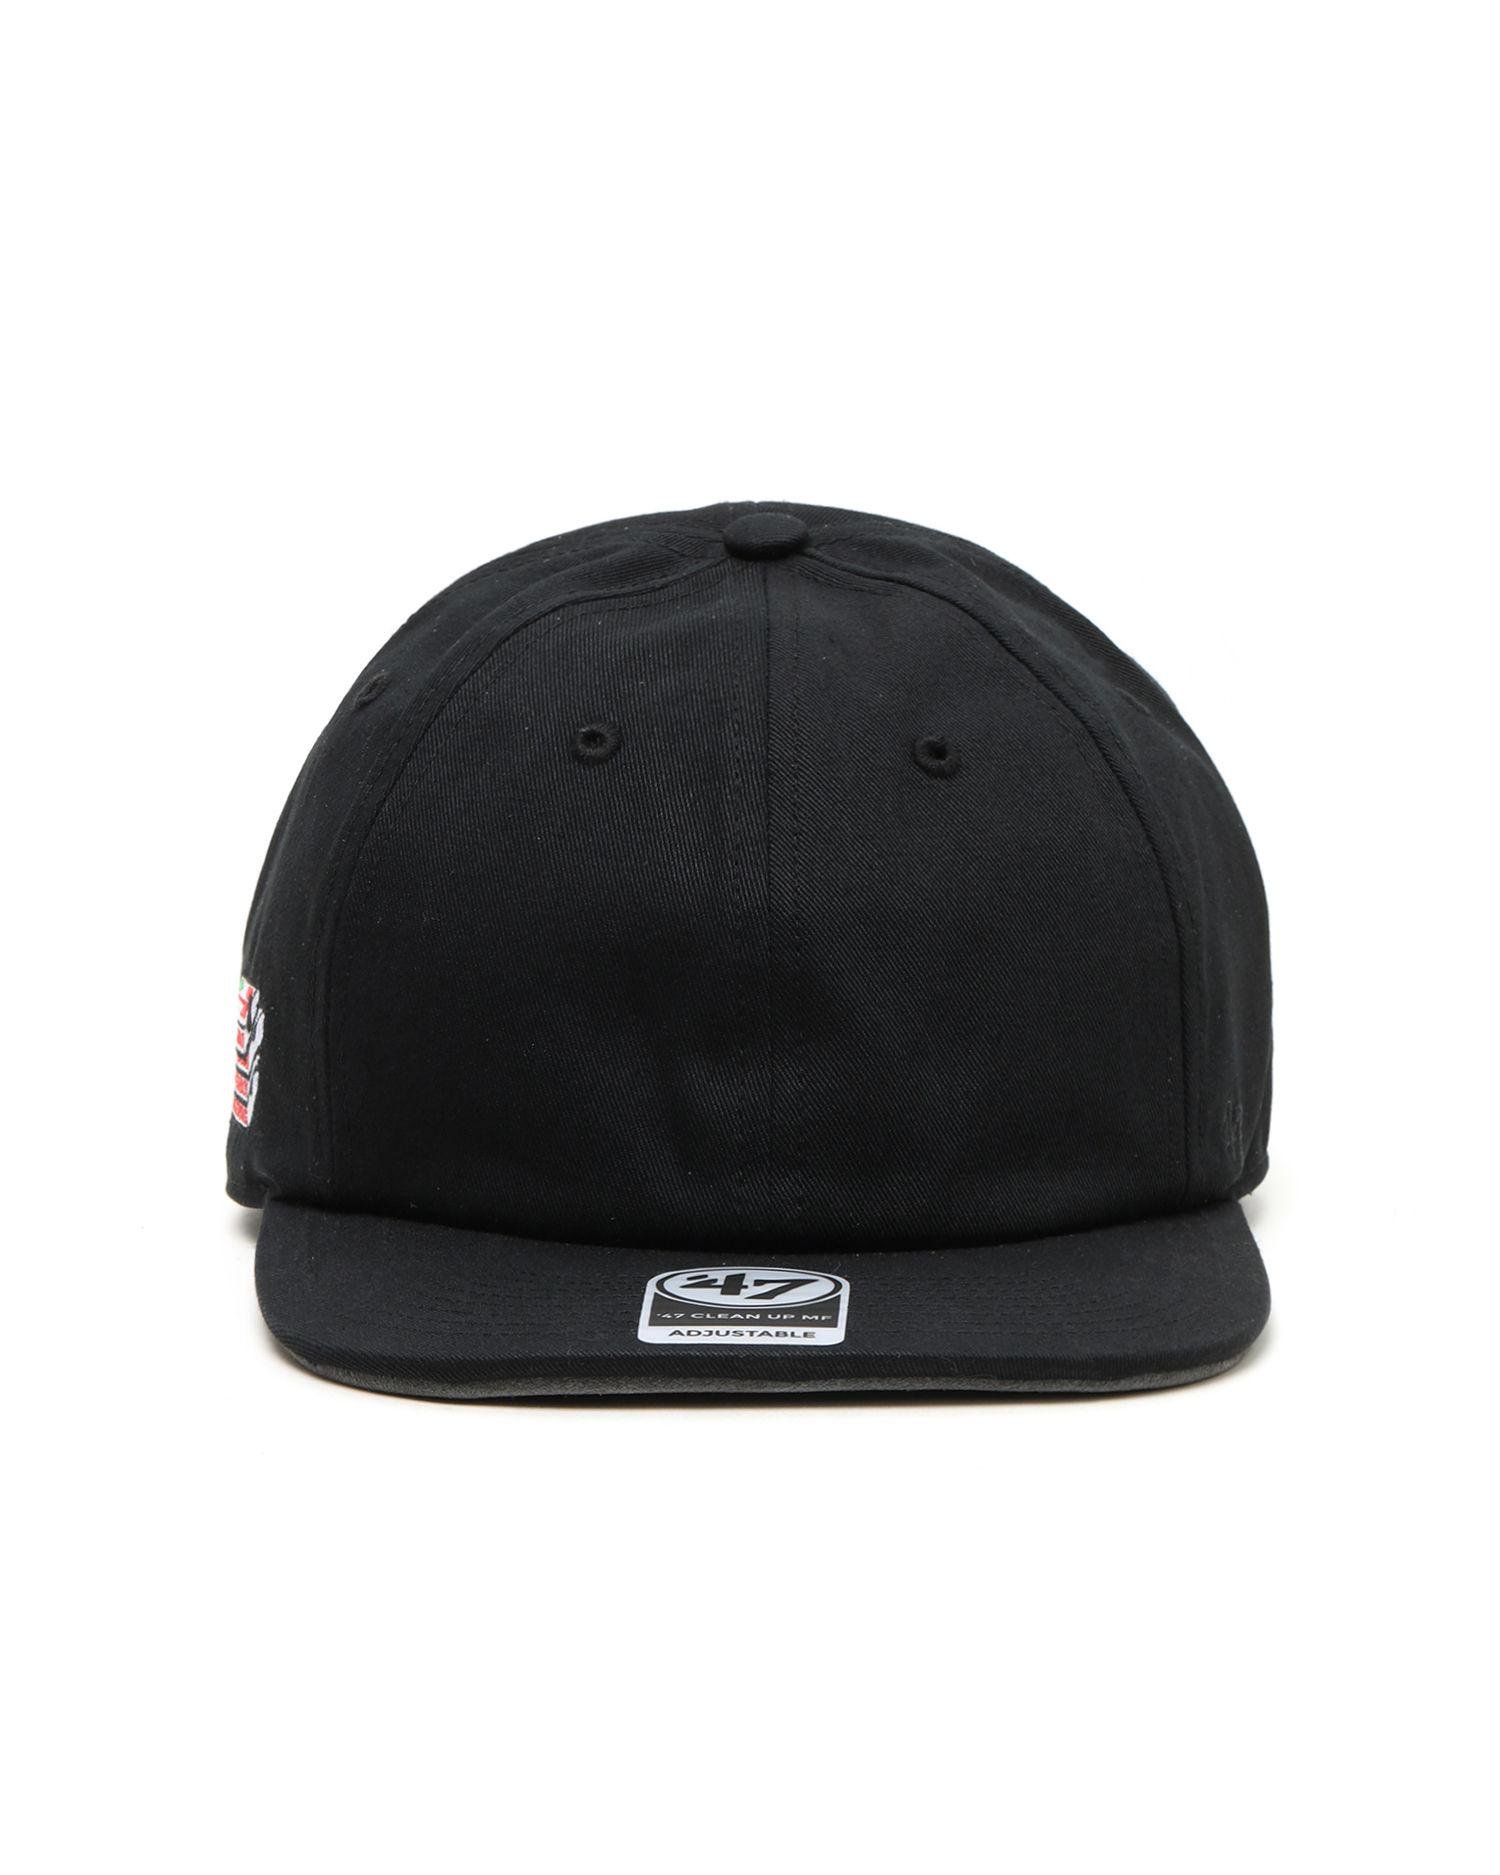 Souped Up cap by '47